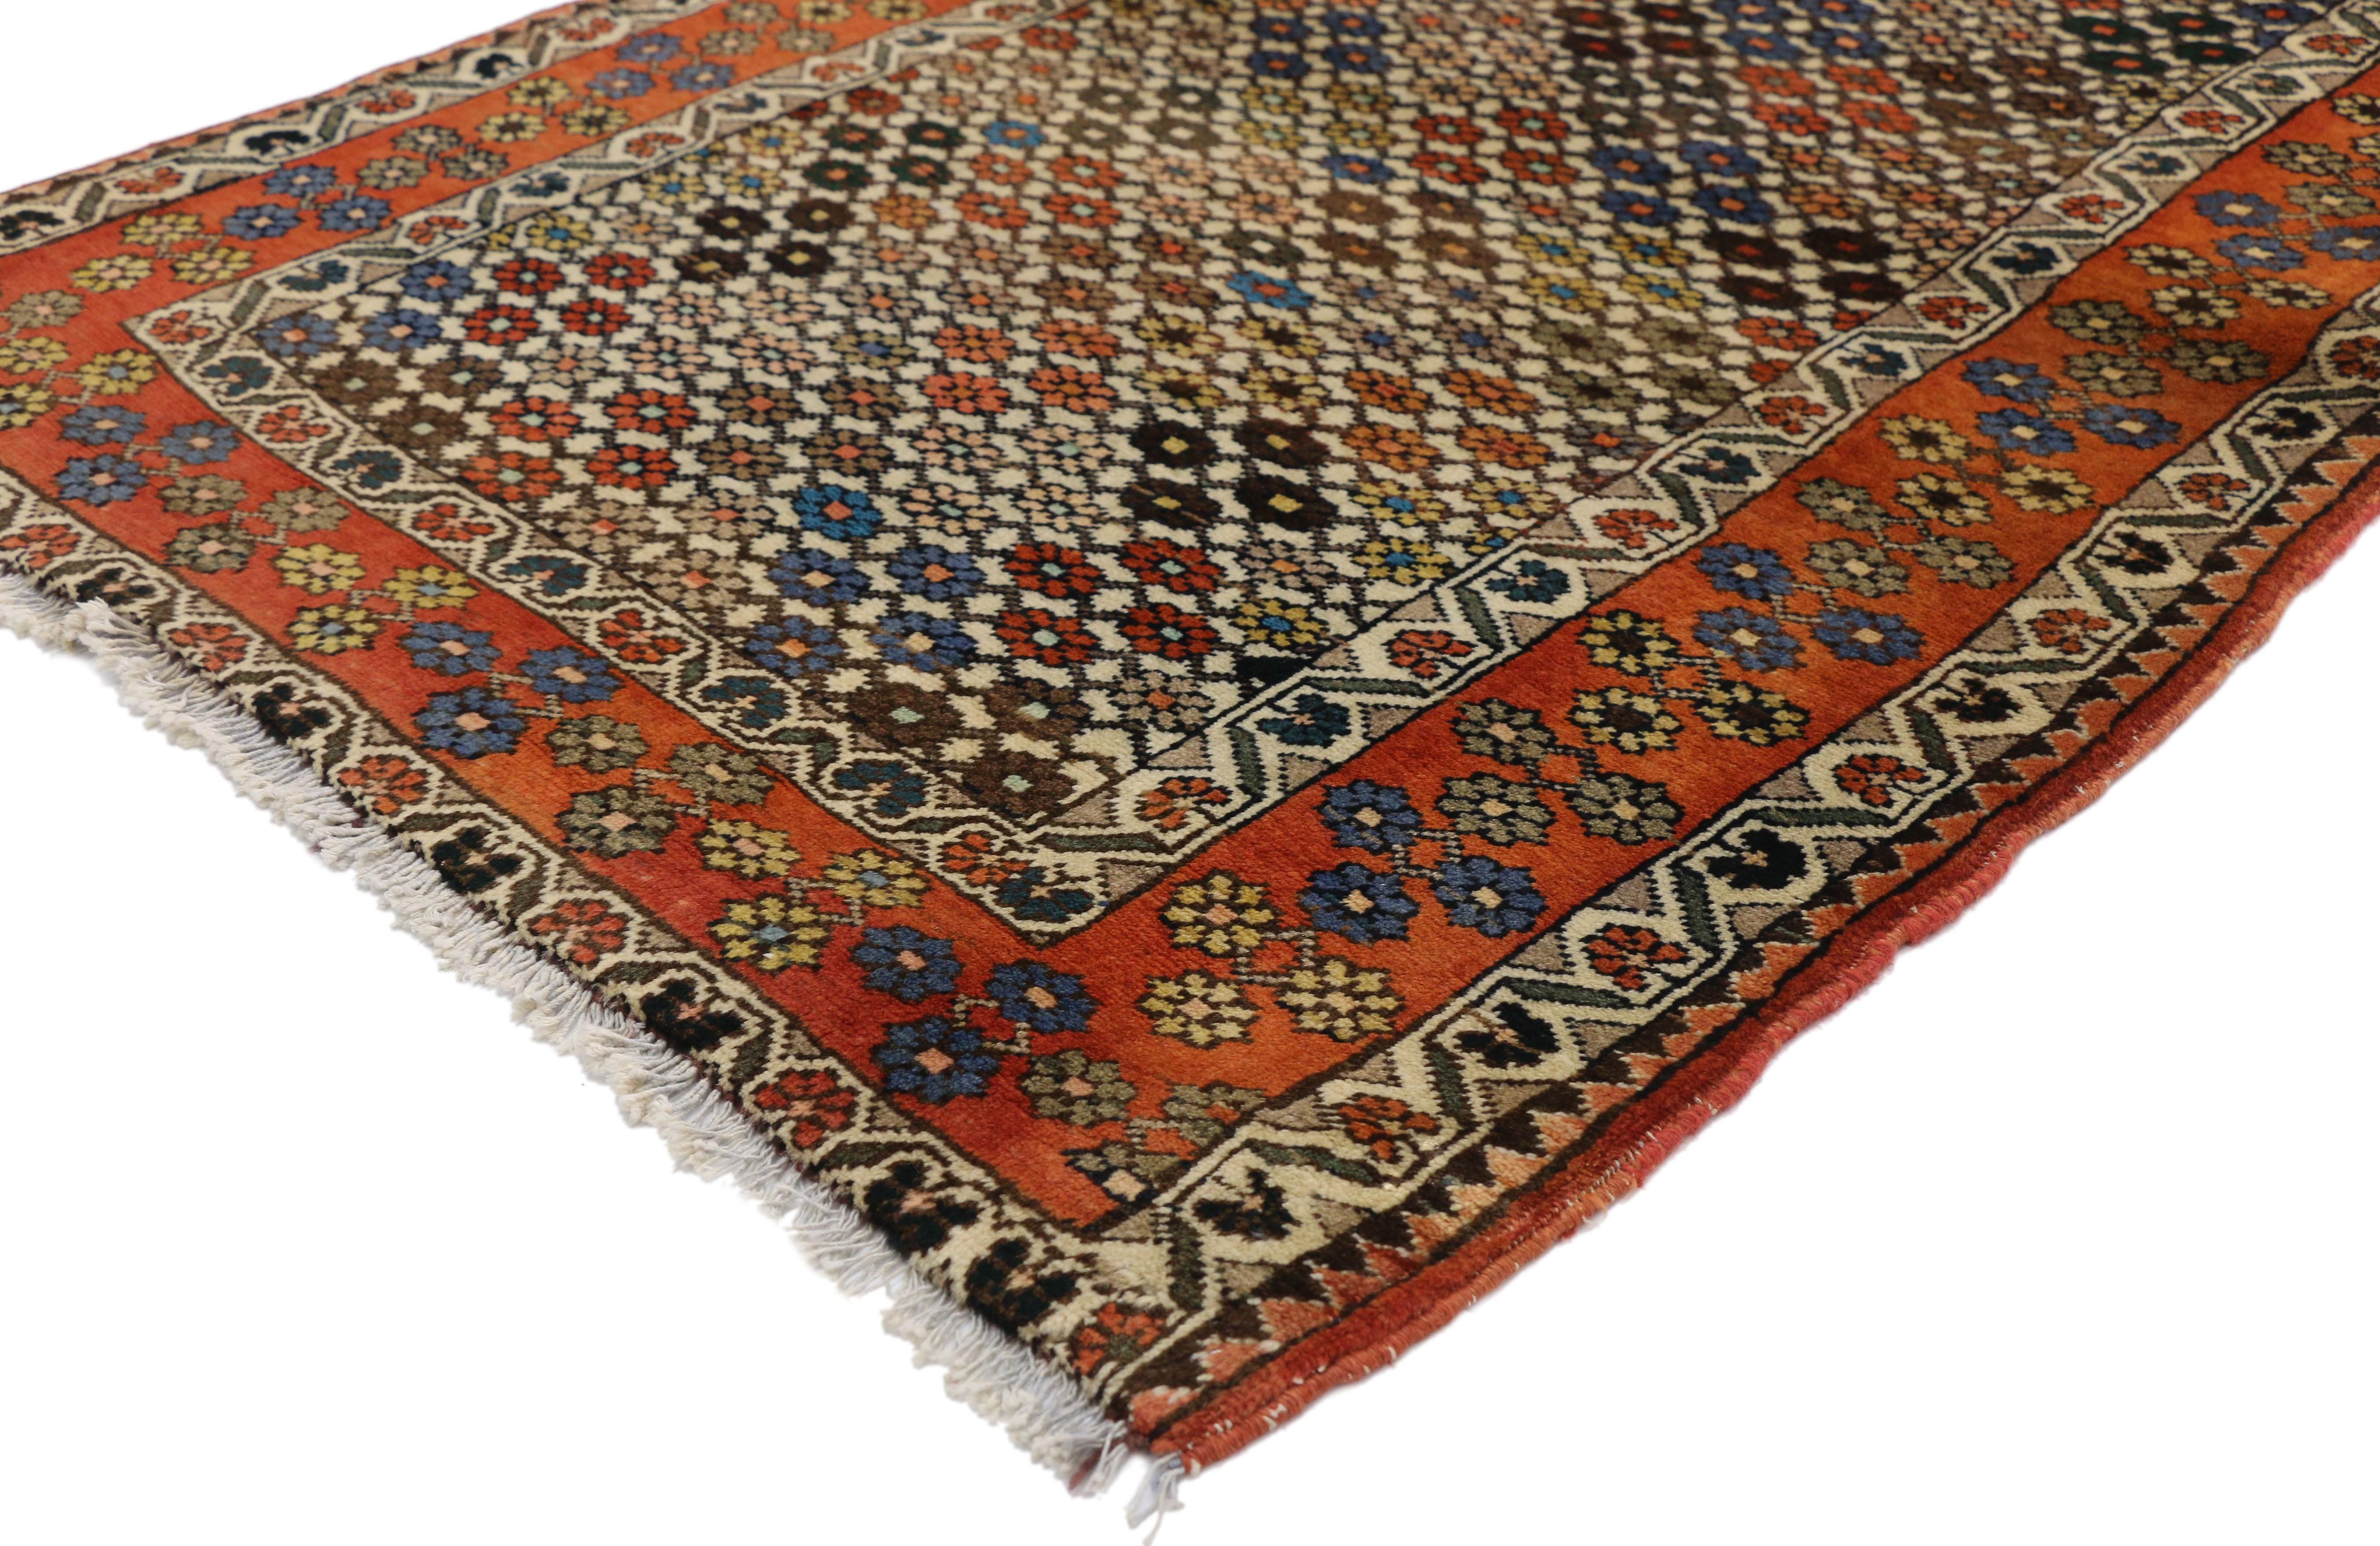 75750, vintage Persian Afshar accent rug in Nomadic Village style. This hand knotted wool vintage Persian Afshar rug features an all-over floral pattern creating an eye-catching lattice design. Quadrants of stylized flower roundels in are laid in